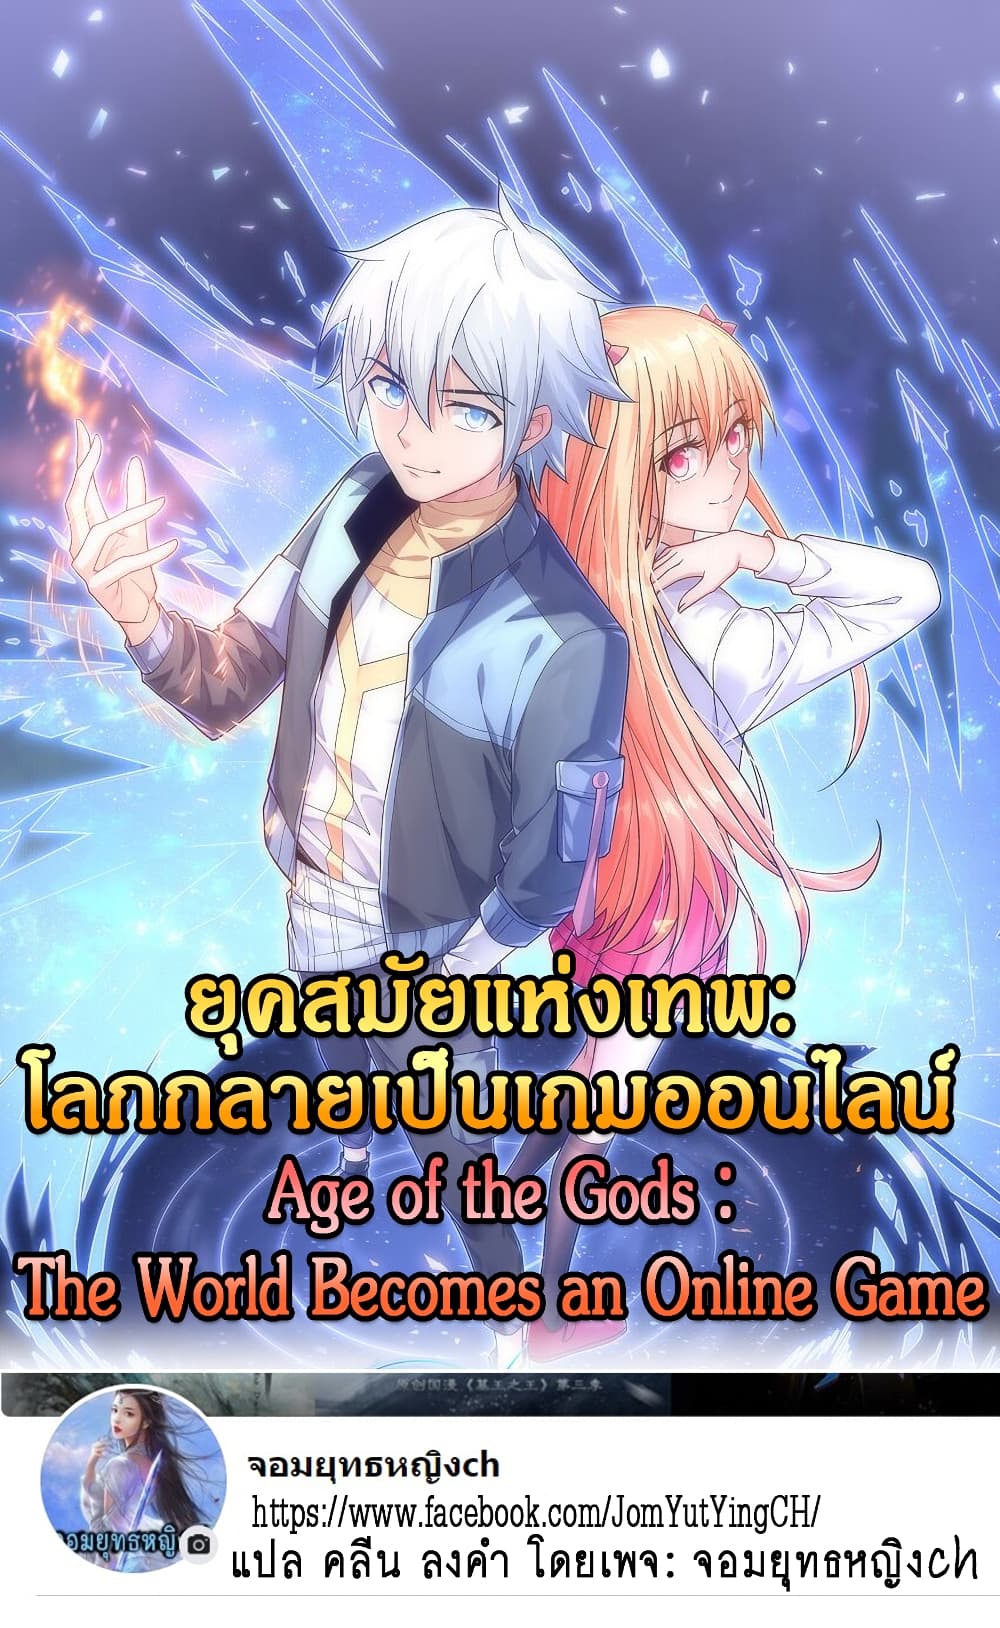 Age of the Gods: The World Becomes an Online Game 4-4